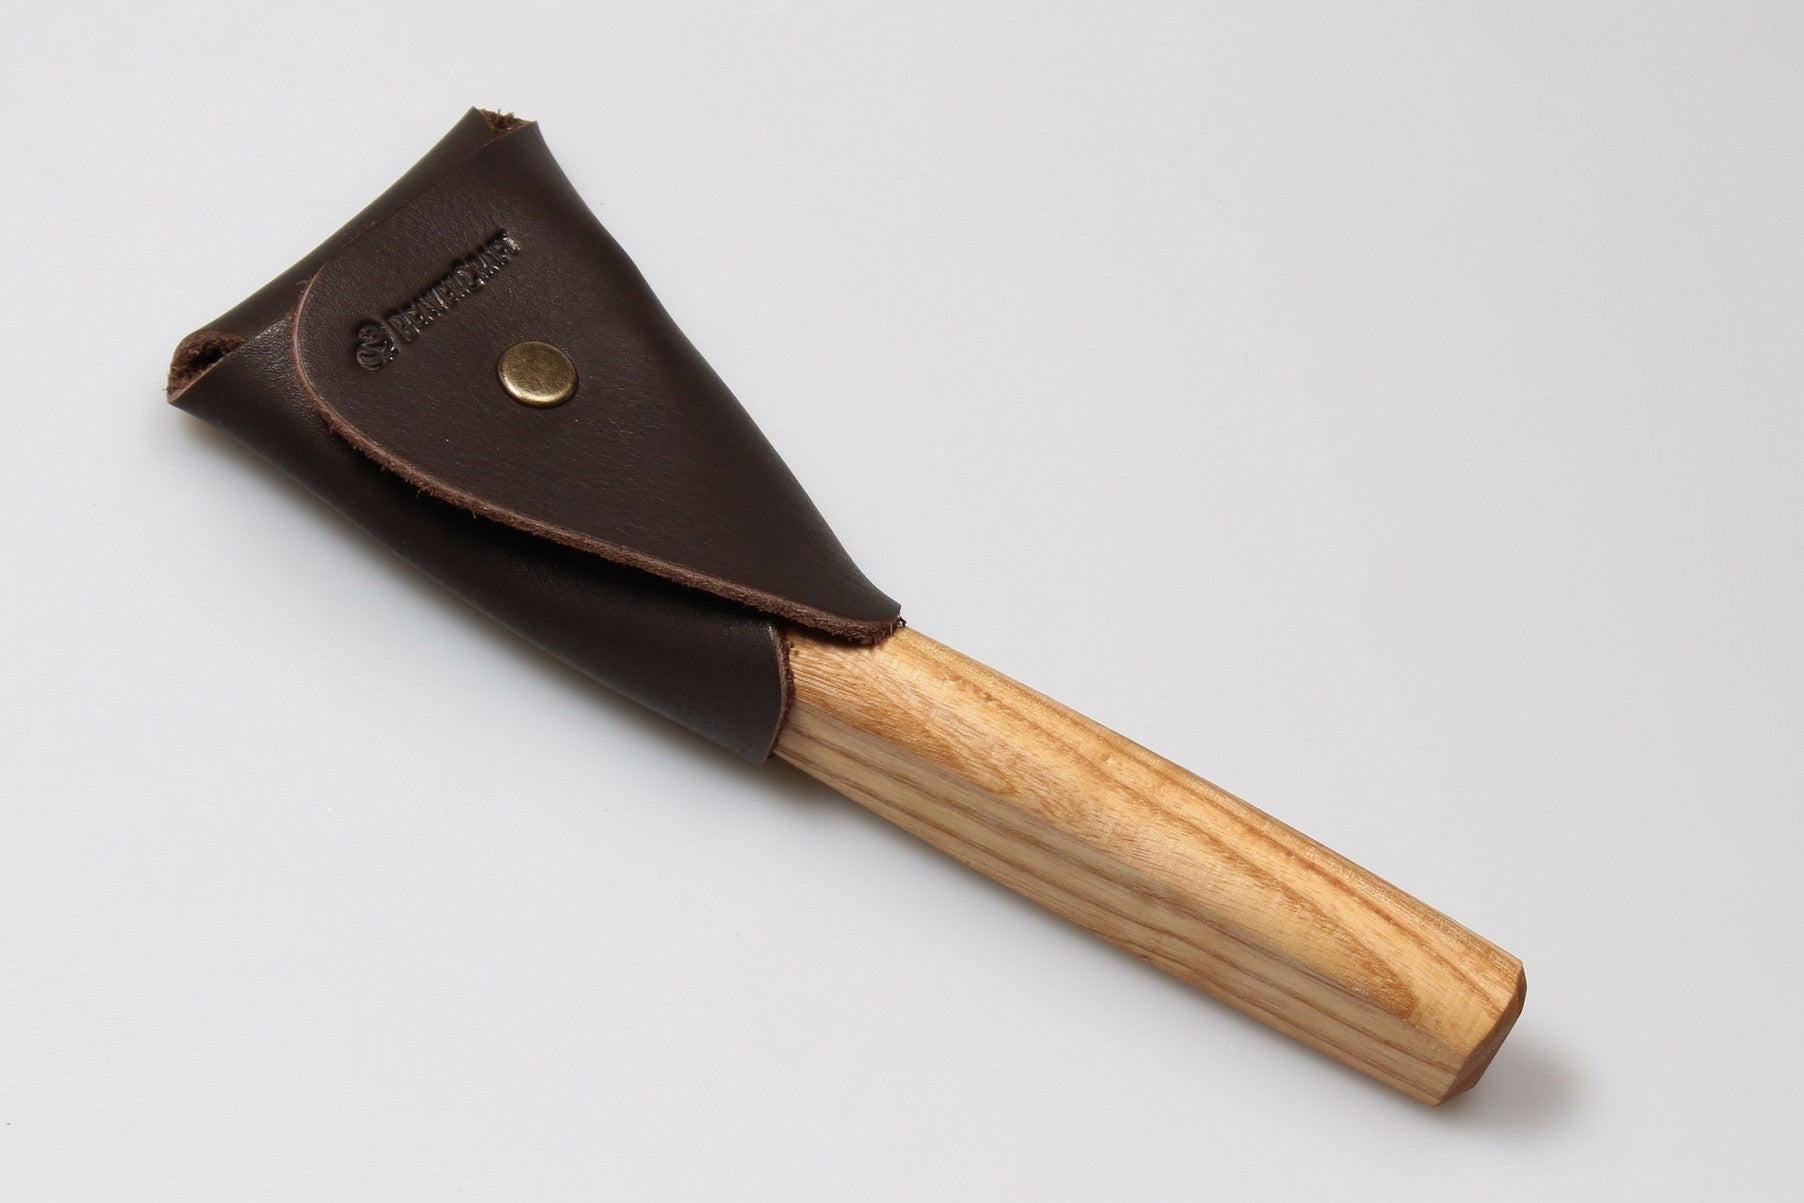 SK1S – Spoon Carving Knife in Leather Sheath